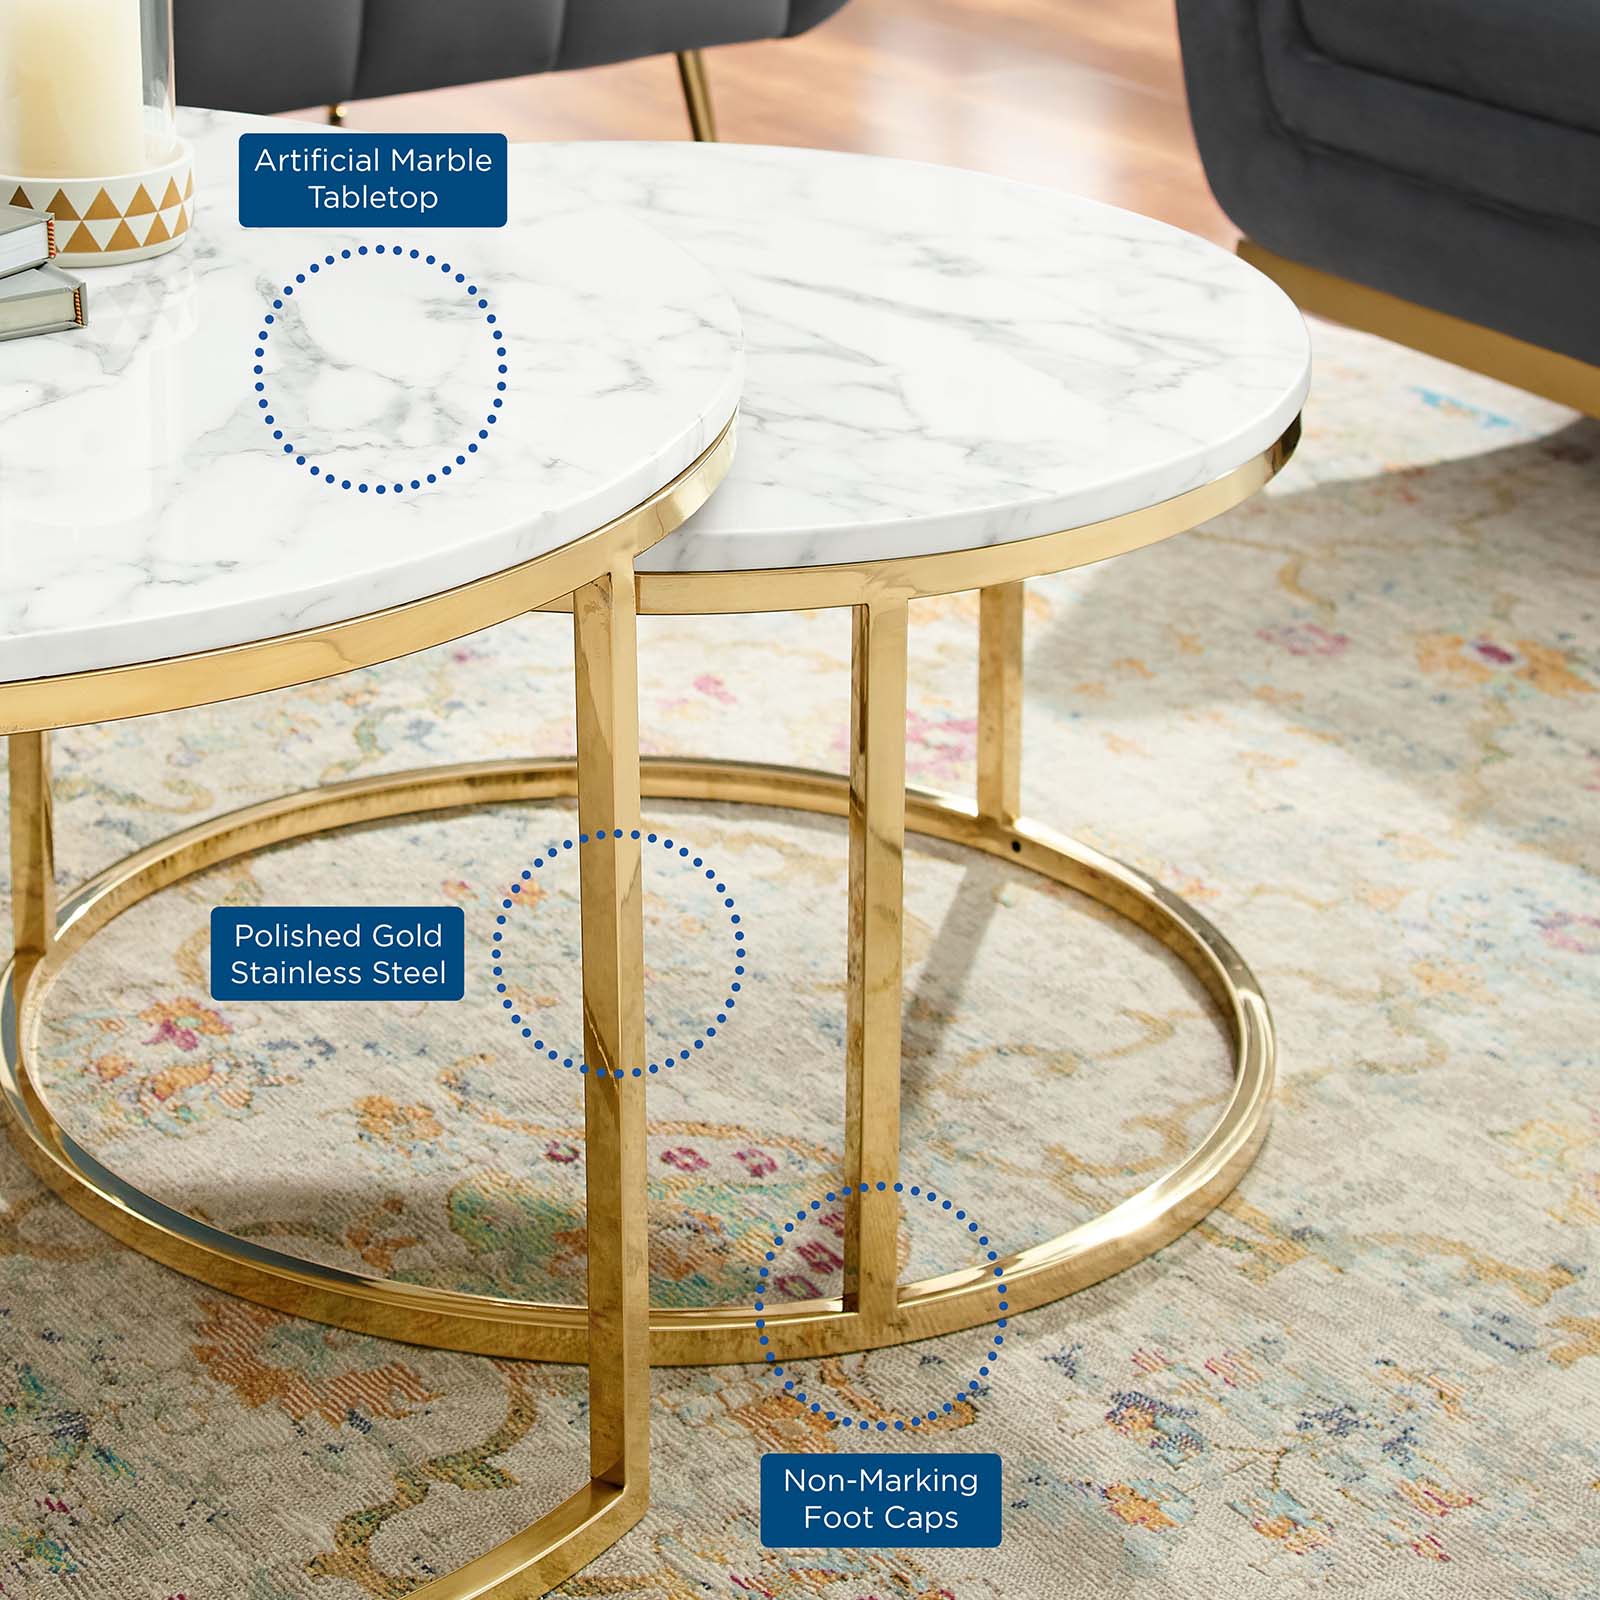 Modway Coffee Tables - Ravenna Artificial Marble Nesting Coffee Table Gold White